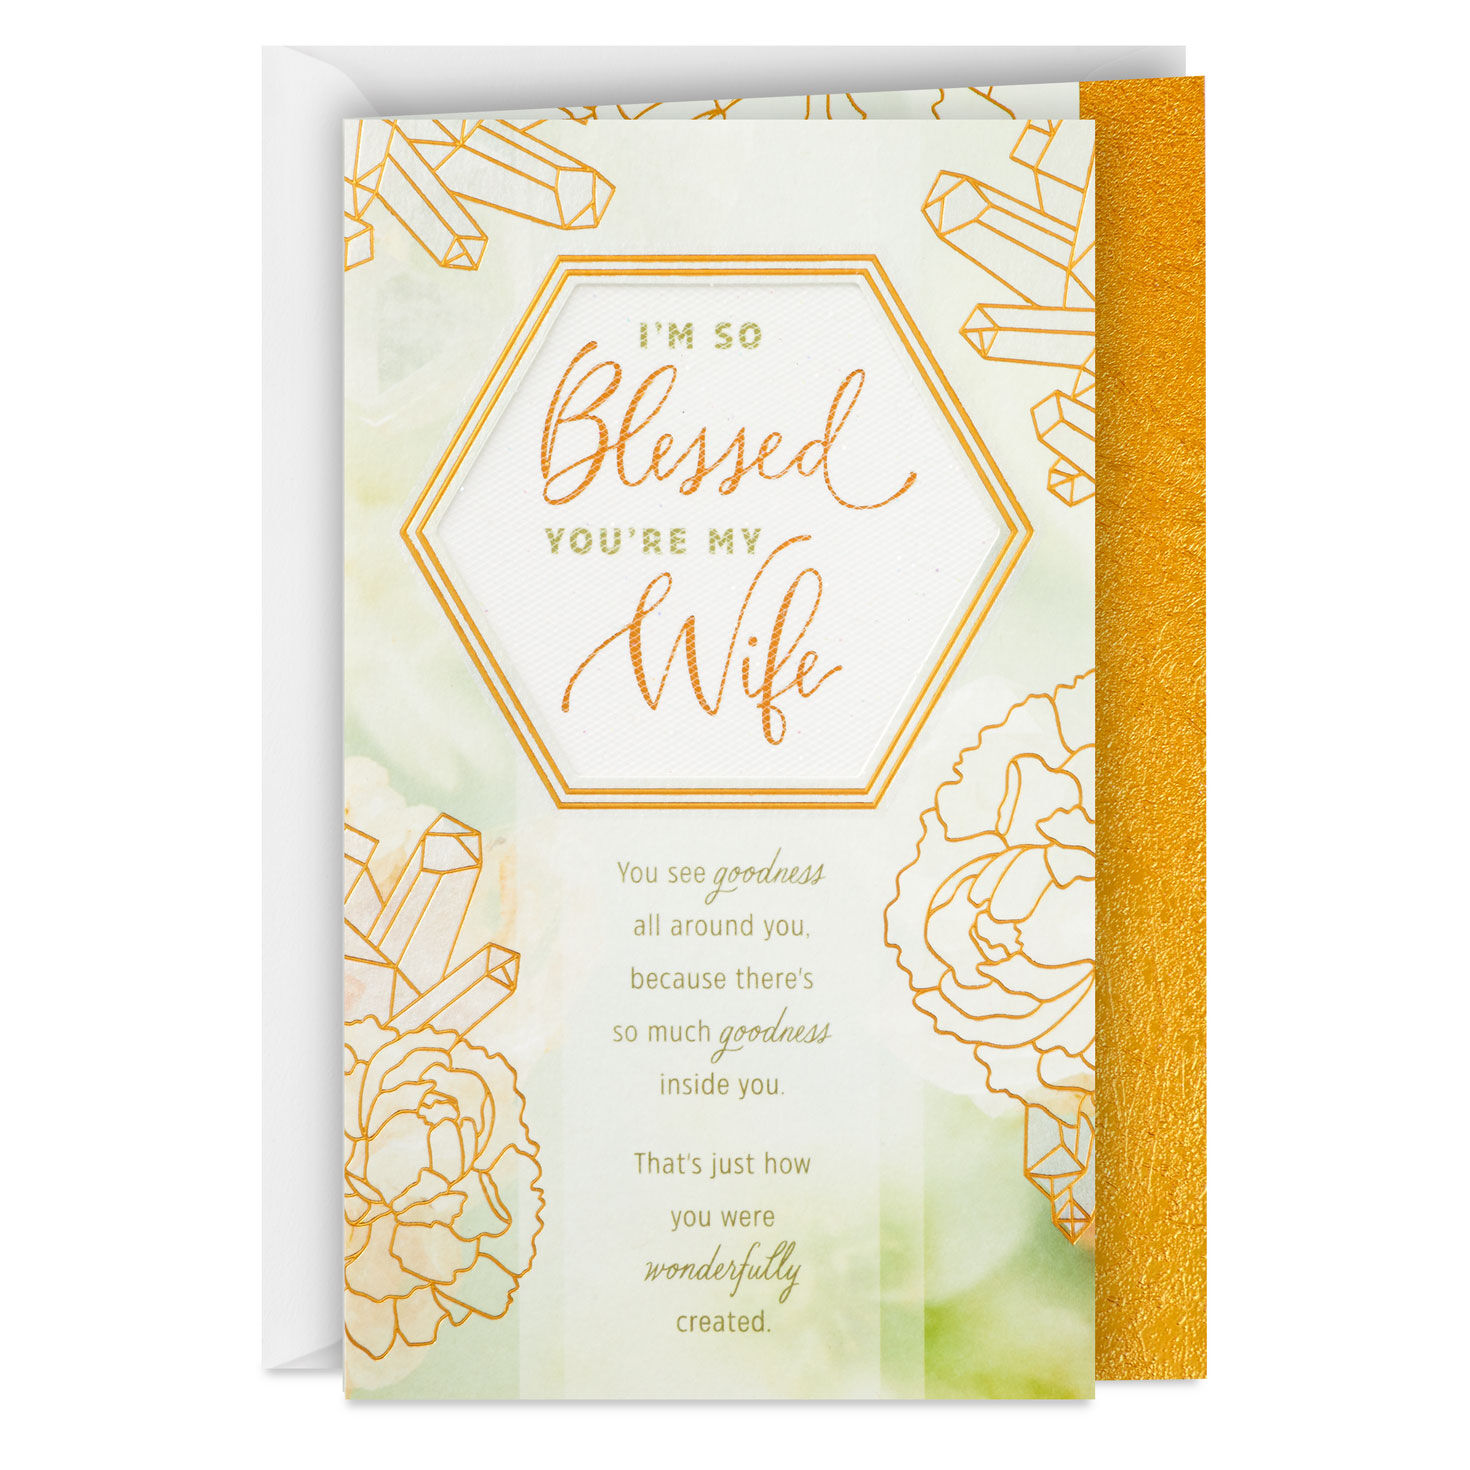 So Blessed You're My Wife Birthday Card for only USD 7.59 | Hallmark